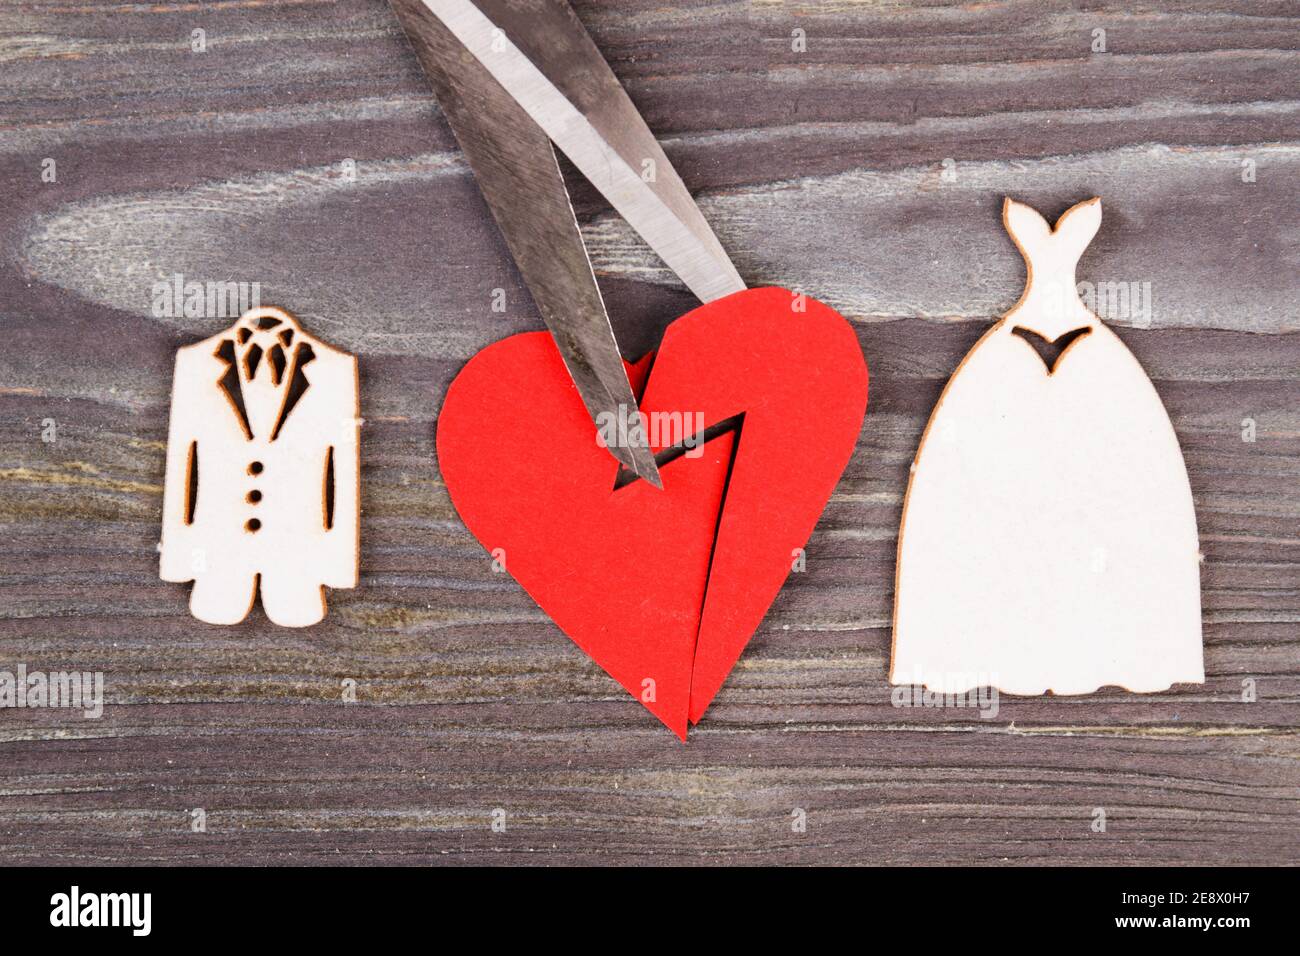 Diy Heart Shaped Paper Cut Out Hearts Background, Scissors, Luck, Love  Background Image And Wallpaper for Free Download